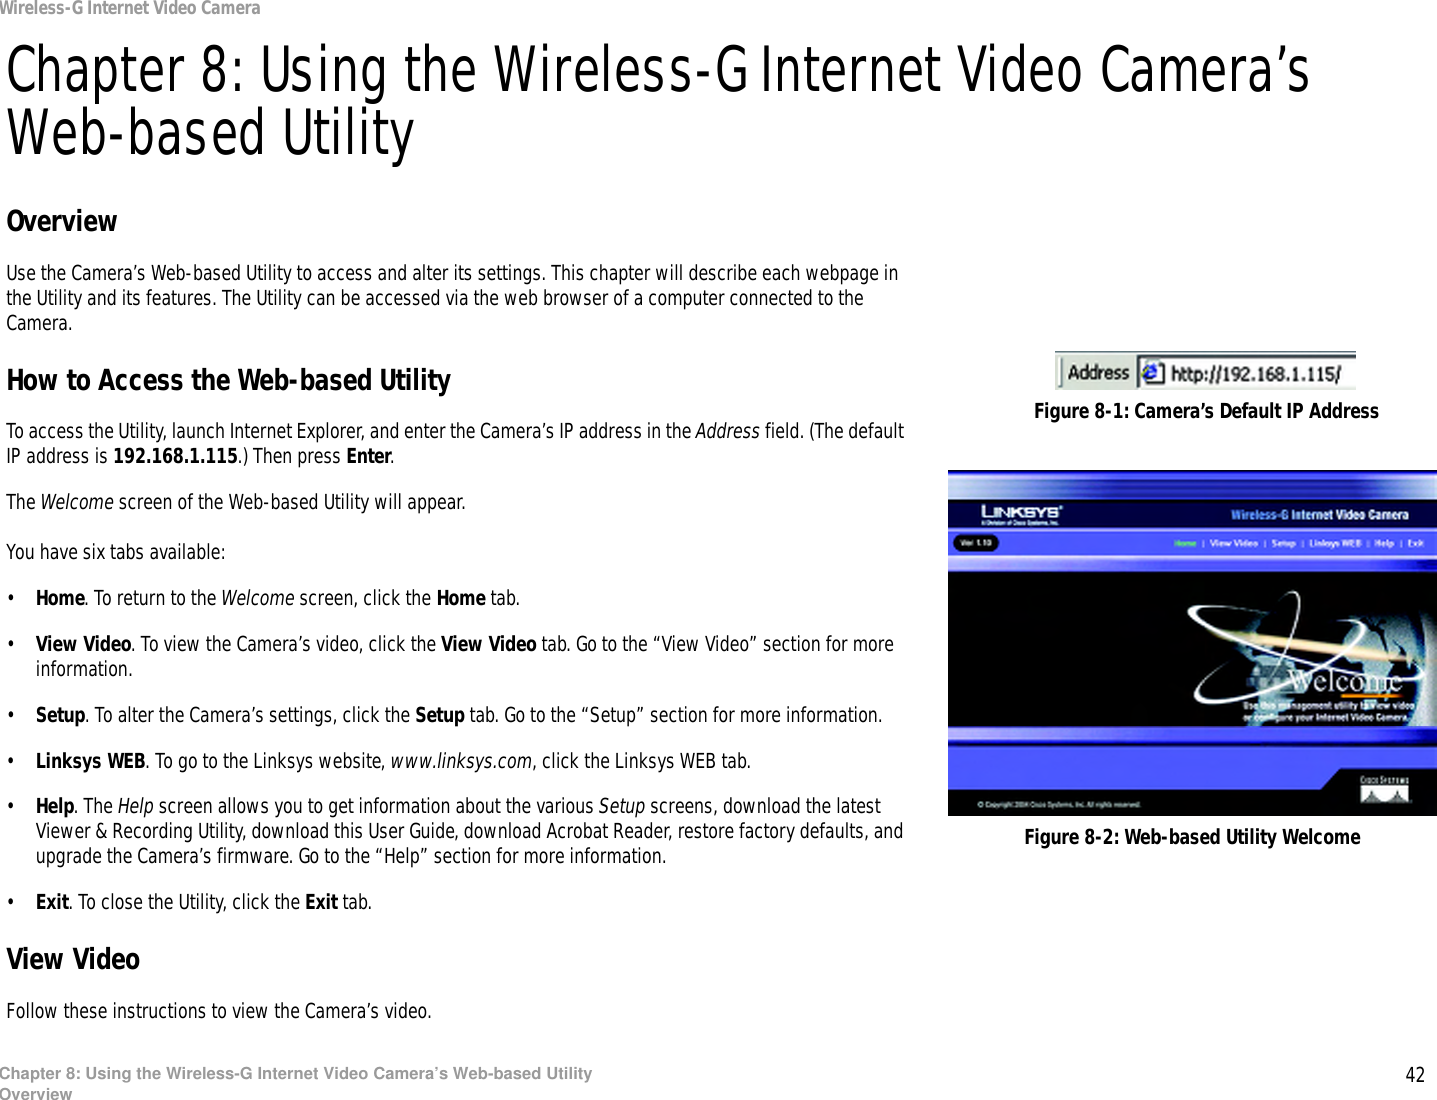 42Chapter 8: Using the Wireless-G Internet Video Camera’s Web-based UtilityOverviewWireless-G Internet Video CameraChapter 8: Using the Wireless-G Internet Video Camera’s Web-based UtilityOverviewUse the Camera’s Web-based Utility to access and alter its settings. This chapter will describe each webpage in the Utility and its features. The Utility can be accessed via the web browser of a computer connected to the Camera.How to Access the Web-based UtilityTo access the Utility, launch Internet Explorer, and enter the Camera’s IP address in the Address field. (The default IP address is 192.168.1.115.) Then press Enter.The Welcome screen of the Web-based Utility will appear.You have six tabs available:•Home. To return to the Welcome screen, click the Home tab.•View Video. To view the Camera’s video, click the View Video tab. Go to the “View Video” section for more information.•Setup. To alter the Camera’s settings, click the Setup tab. Go to the “Setup” section for more information.•Linksys WEB. To go to the Linksys website, www.linksys.com, click the Linksys WEB tab.•Help. The Help screen allows you to get information about the various Setup screens, download the latest Viewer &amp; Recording Utility, download this User Guide, download Acrobat Reader, restore factory defaults, and upgrade the Camera’s firmware. Go to the “Help” section for more information.•Exit. To close the Utility, click the Exit tab.View VideoFollow these instructions to view the Camera’s video.Figure 8-2: Web-based Utility WelcomeFigure 8-1: Camera’s Default IP Address